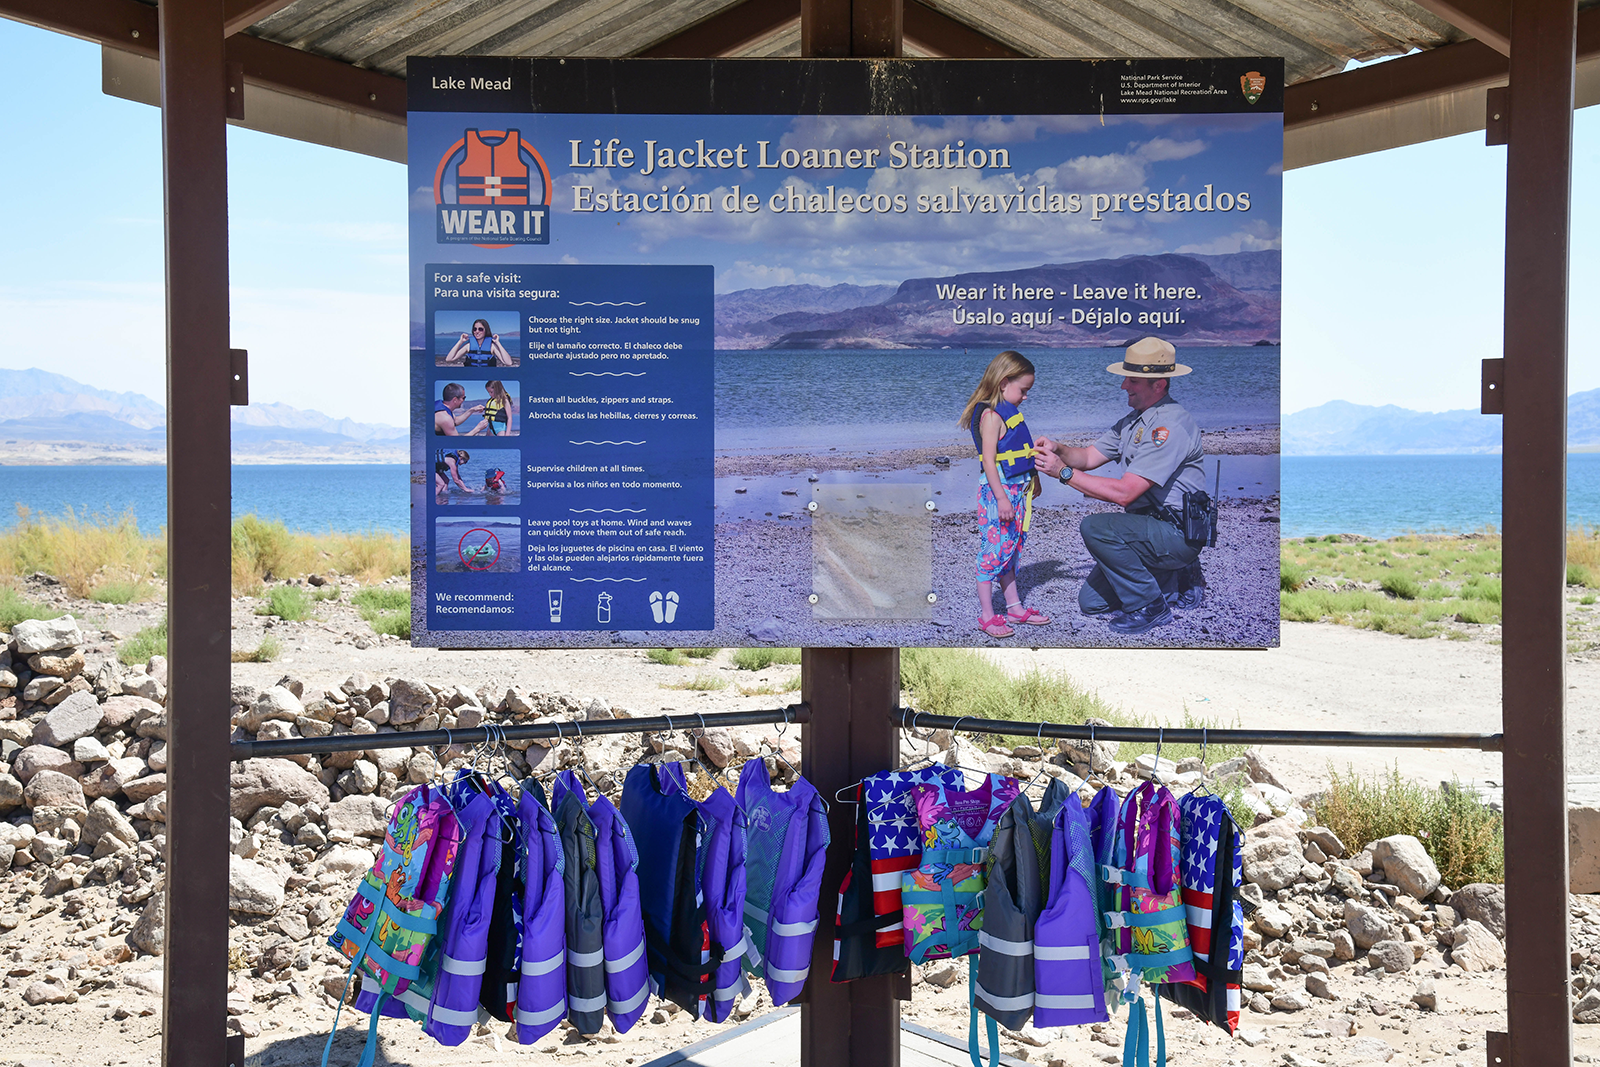 kiosk with a sign and new life jackets hanging with water in the background